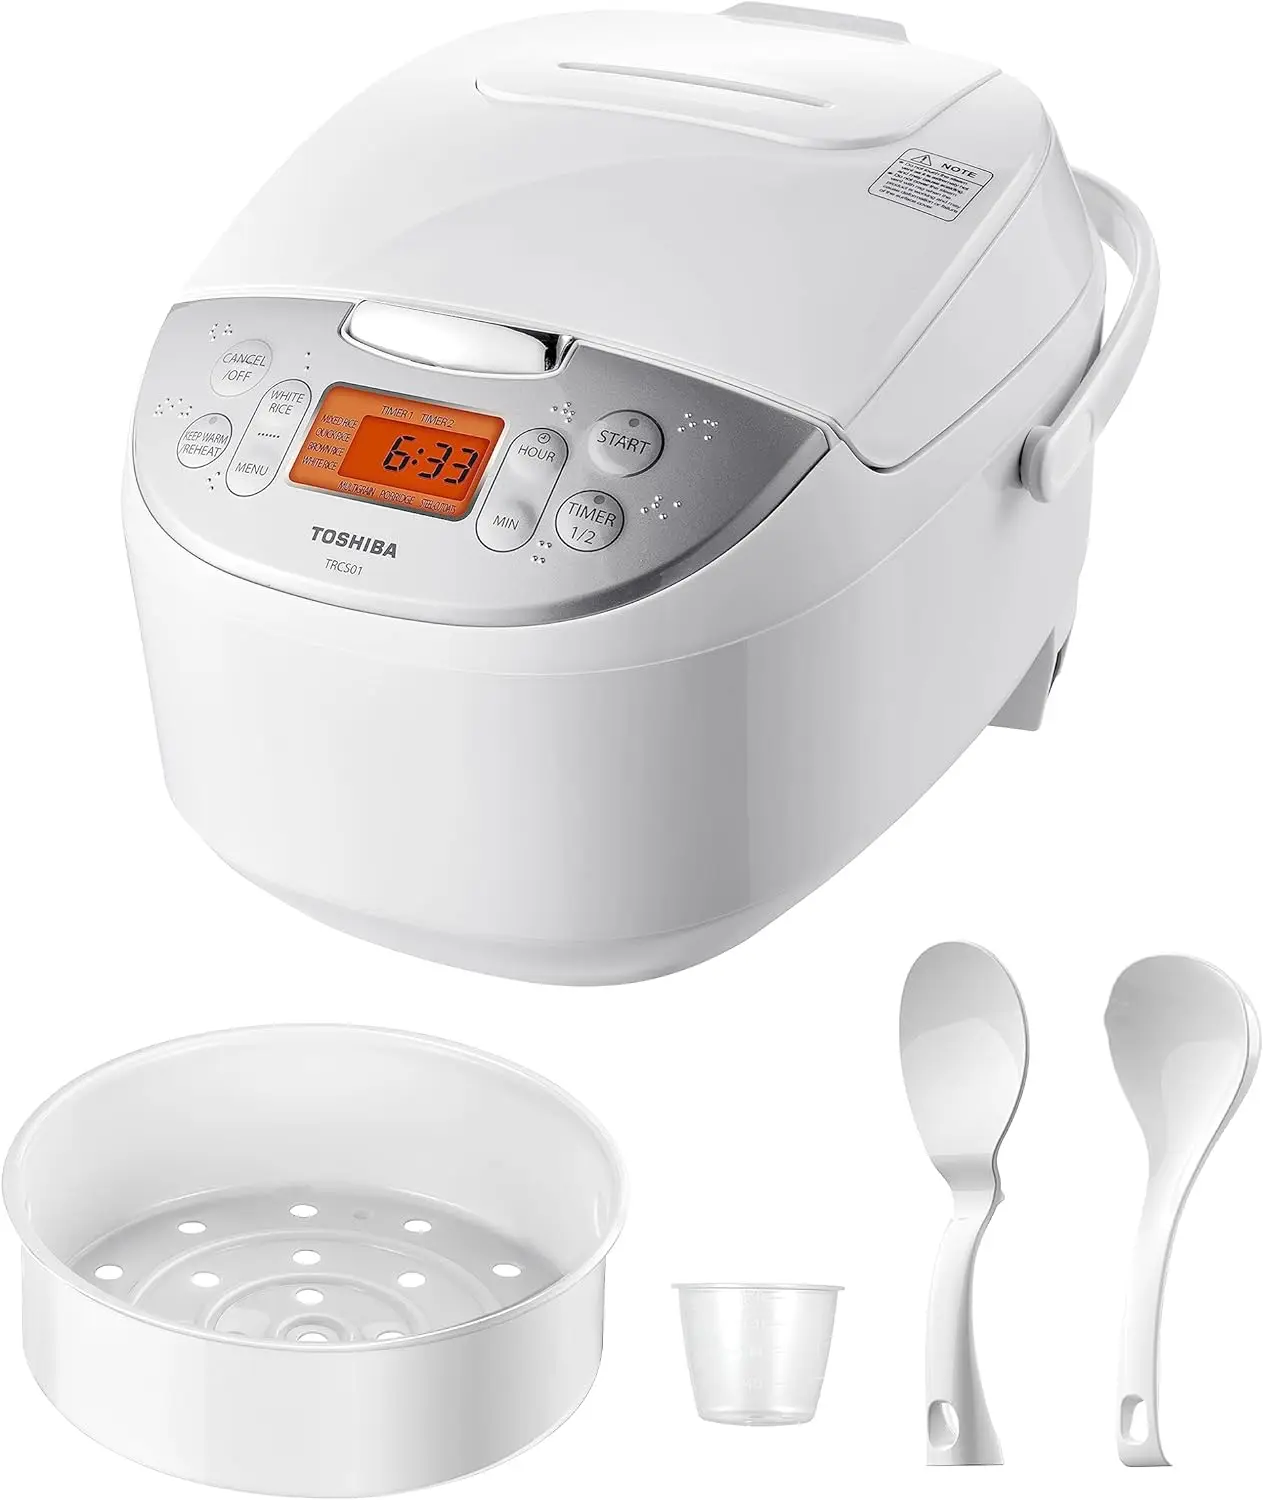 

Rice Cooker 6 Cup Uncooked \u2013 Japanese Rice Cooker with Fuzzy Logic Technology, 7 Cooking Functions, Digital Display, 2 Dela